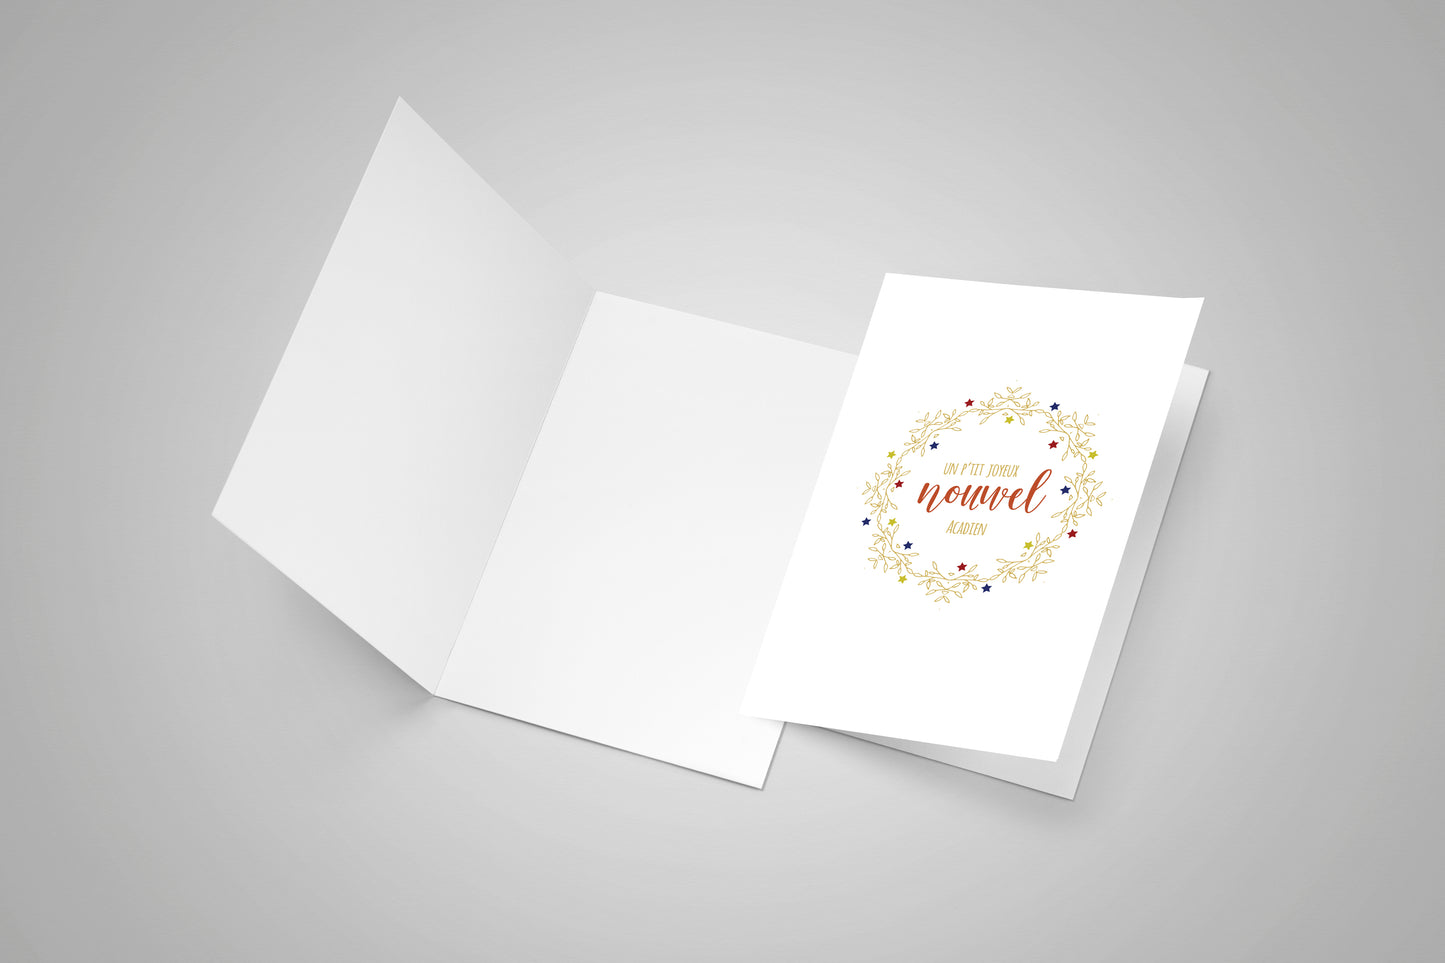 A open blank greeting card with a closed greeting card with an Acadian Merry Christmas on the front.